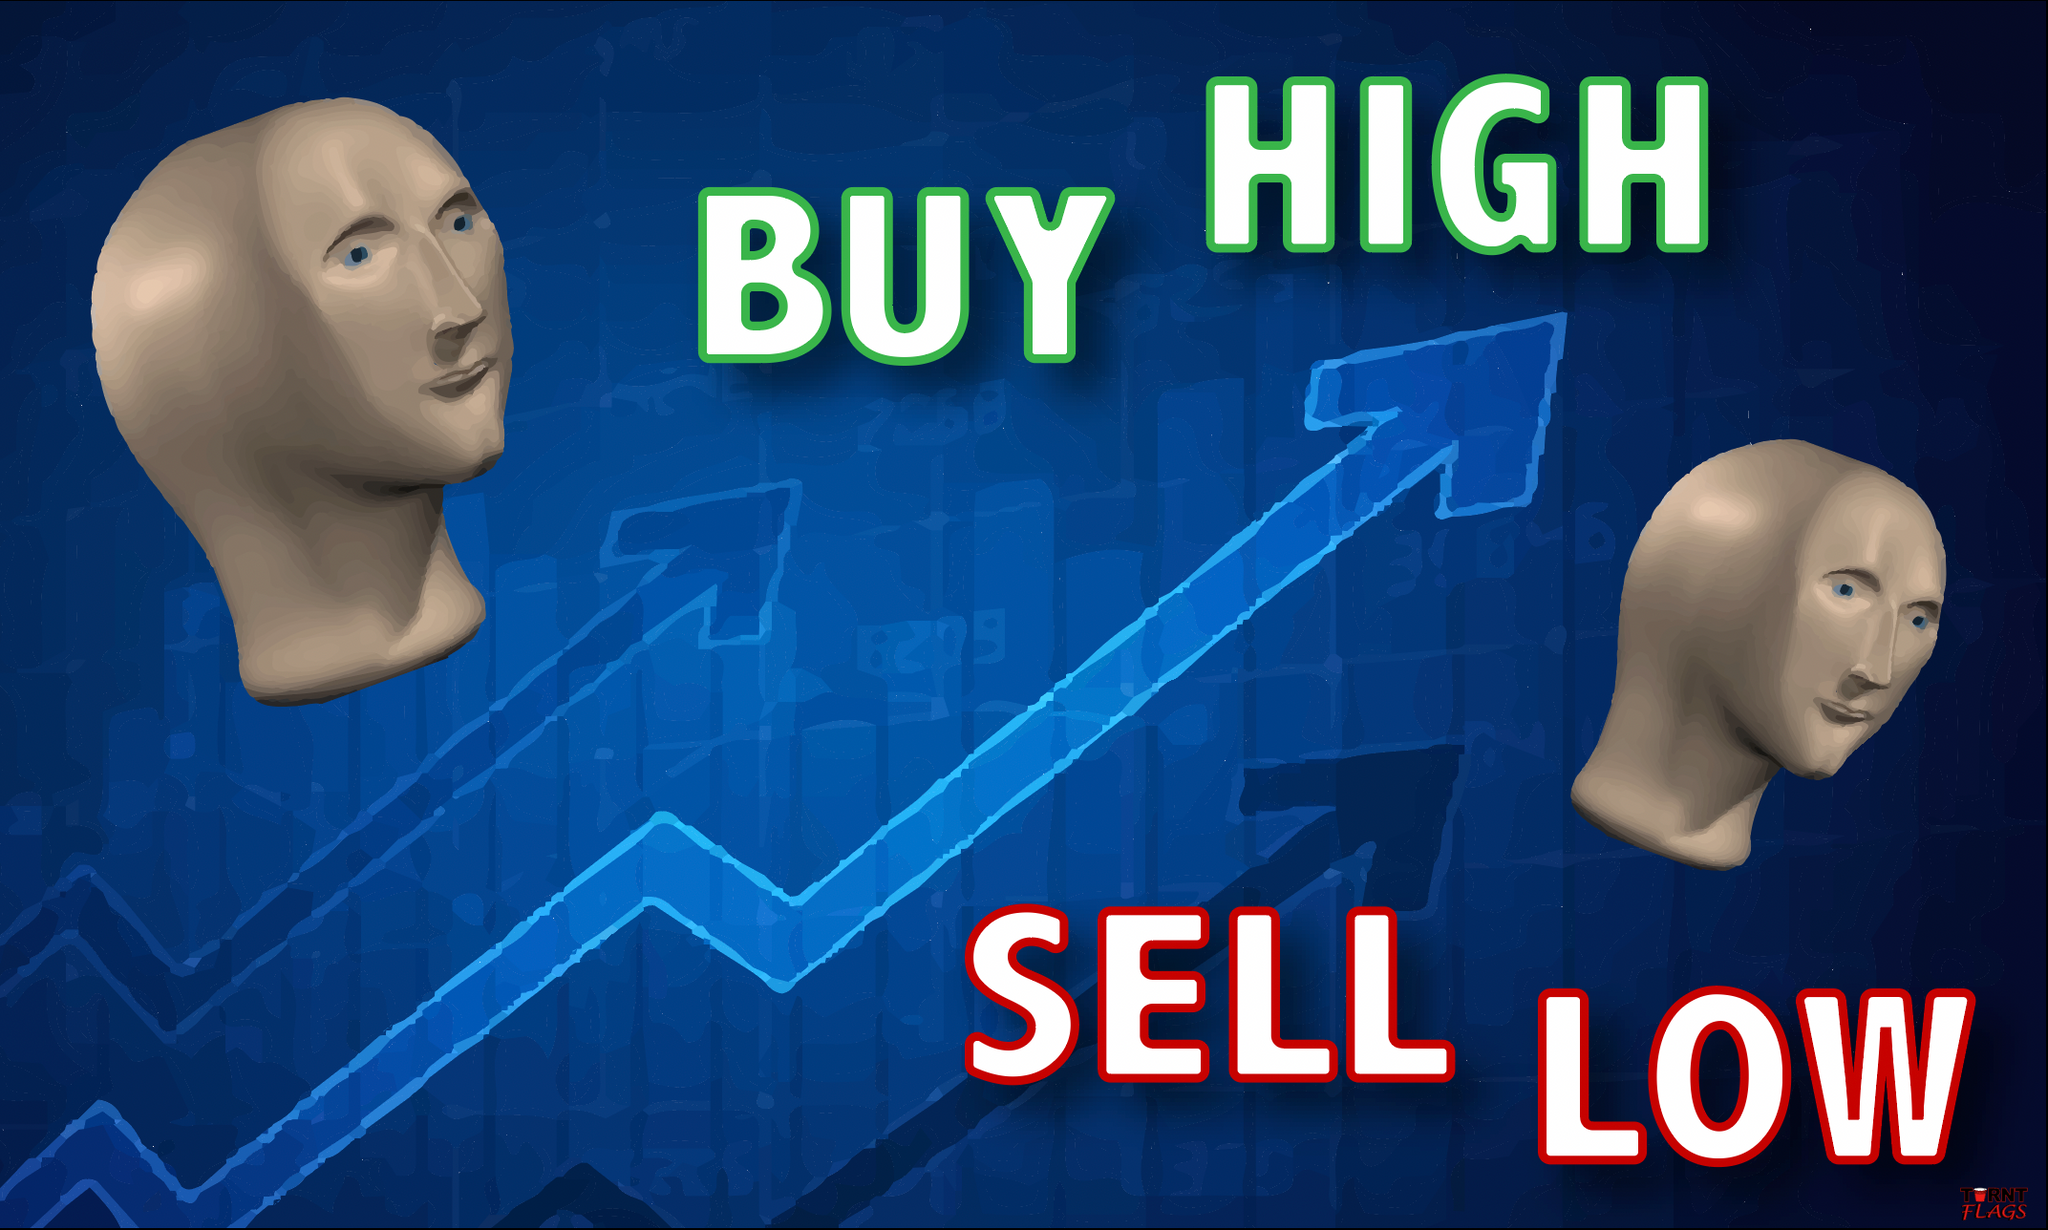 Buy High, Sell Low